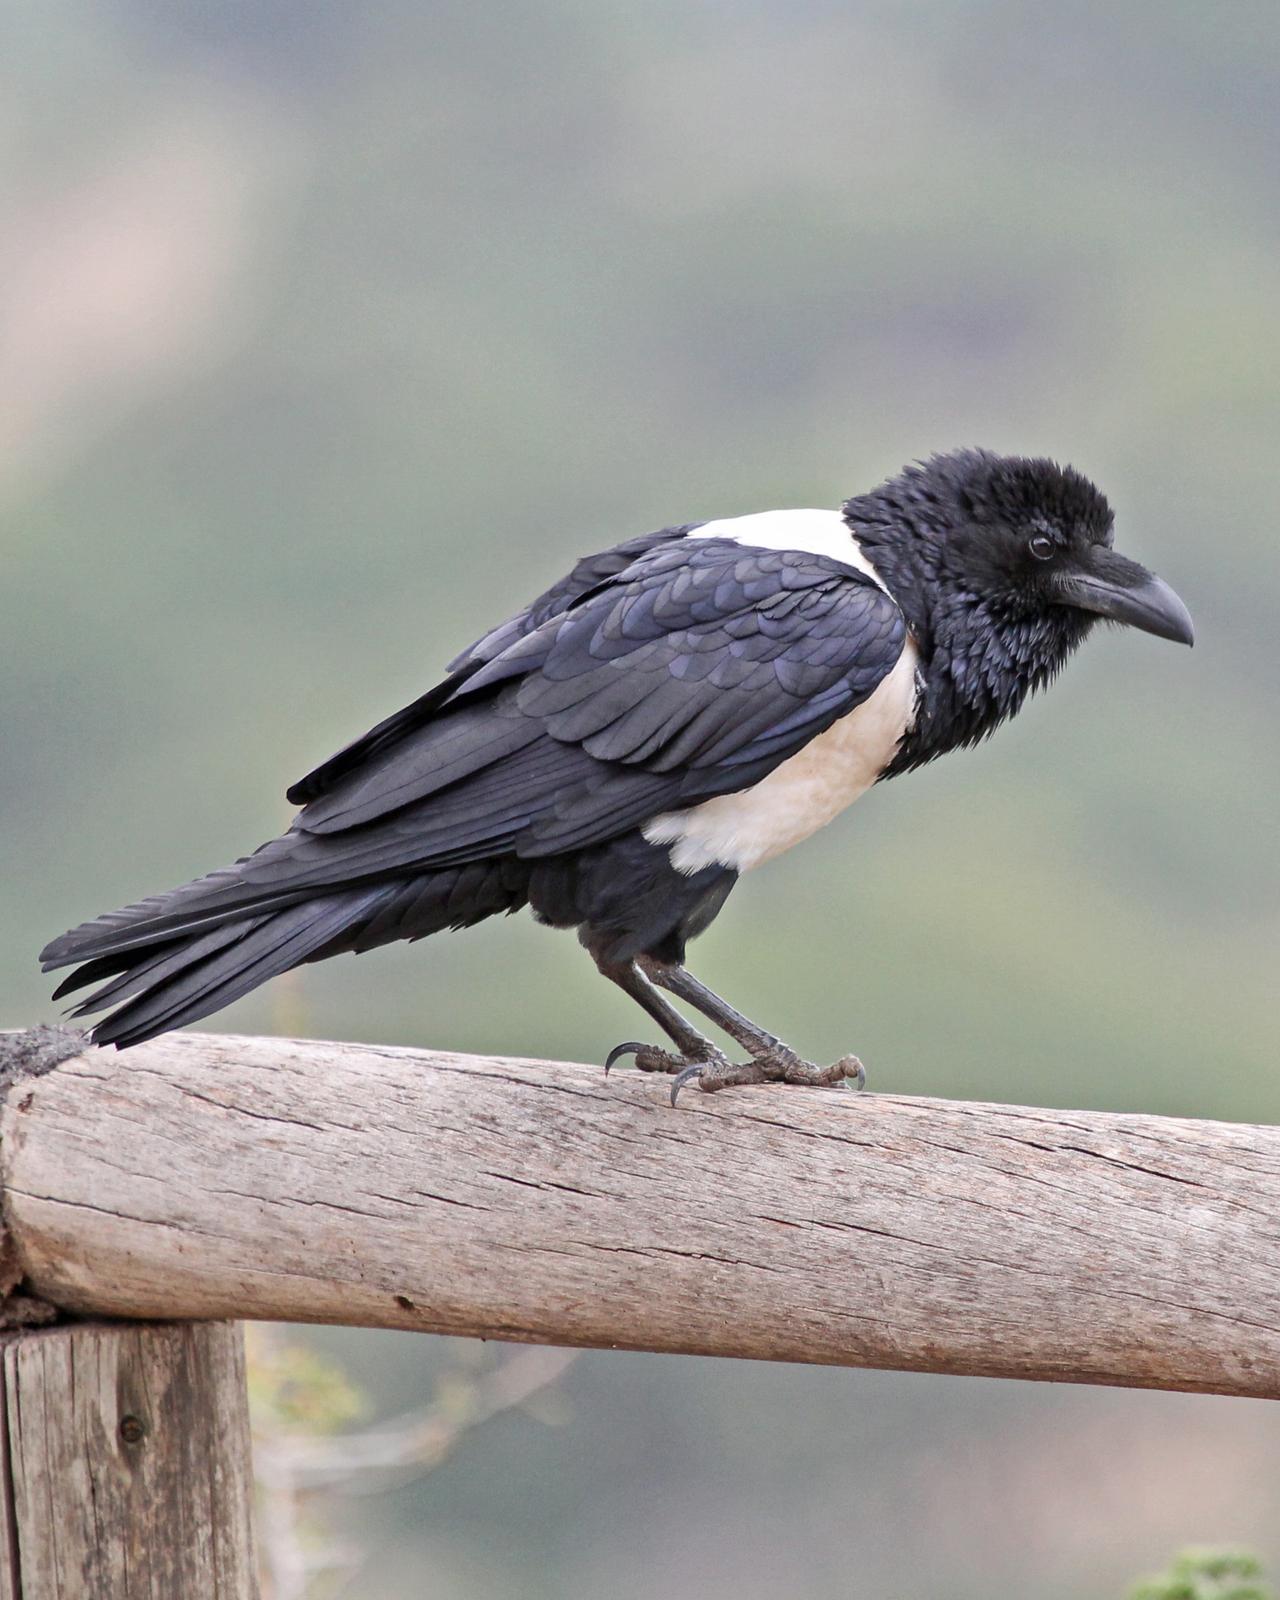 Pied Crow Photo by Robert Polkinghorn